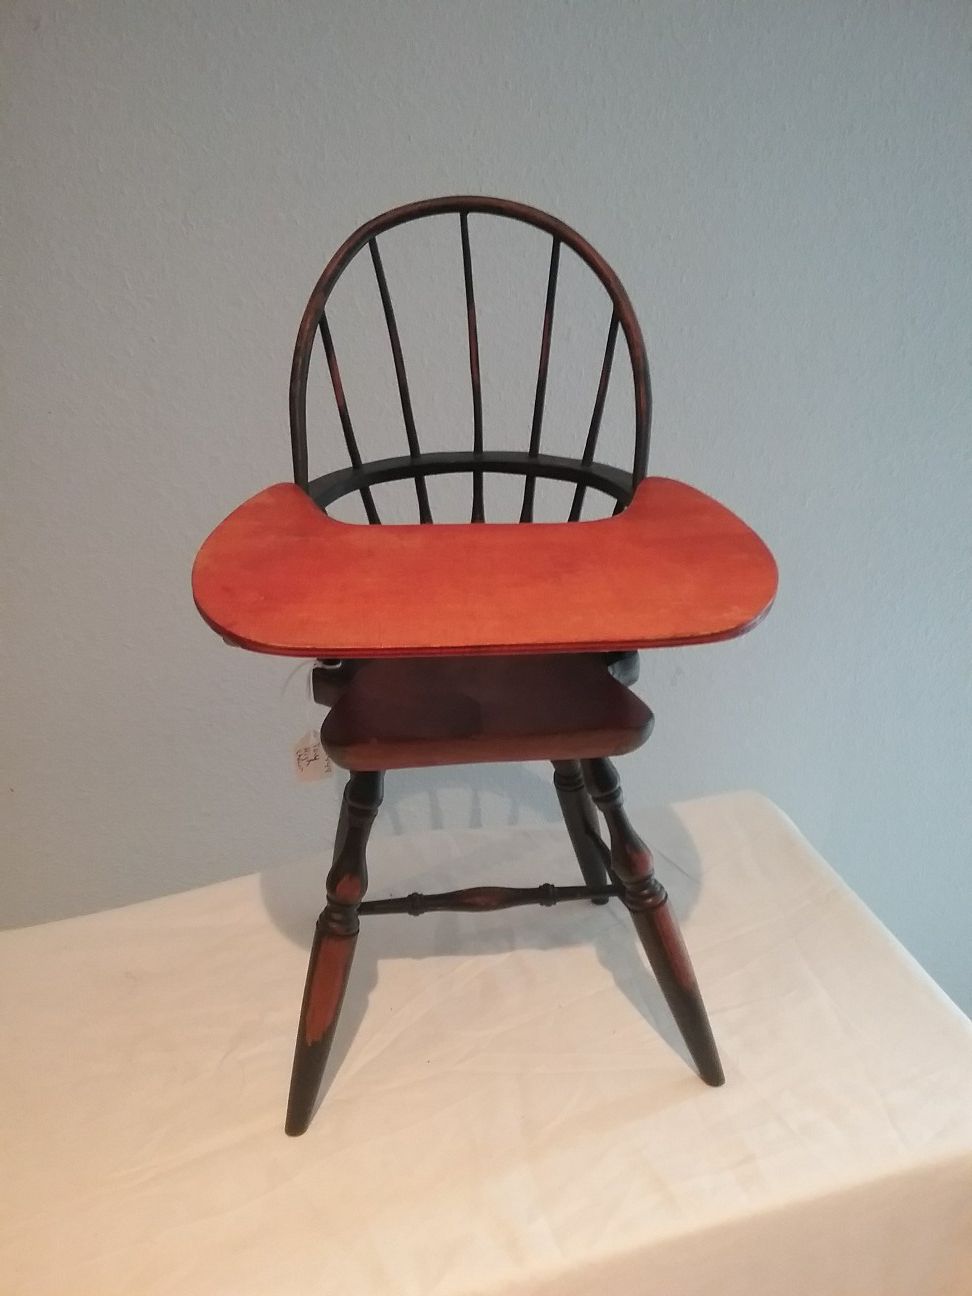 Toy doll chair